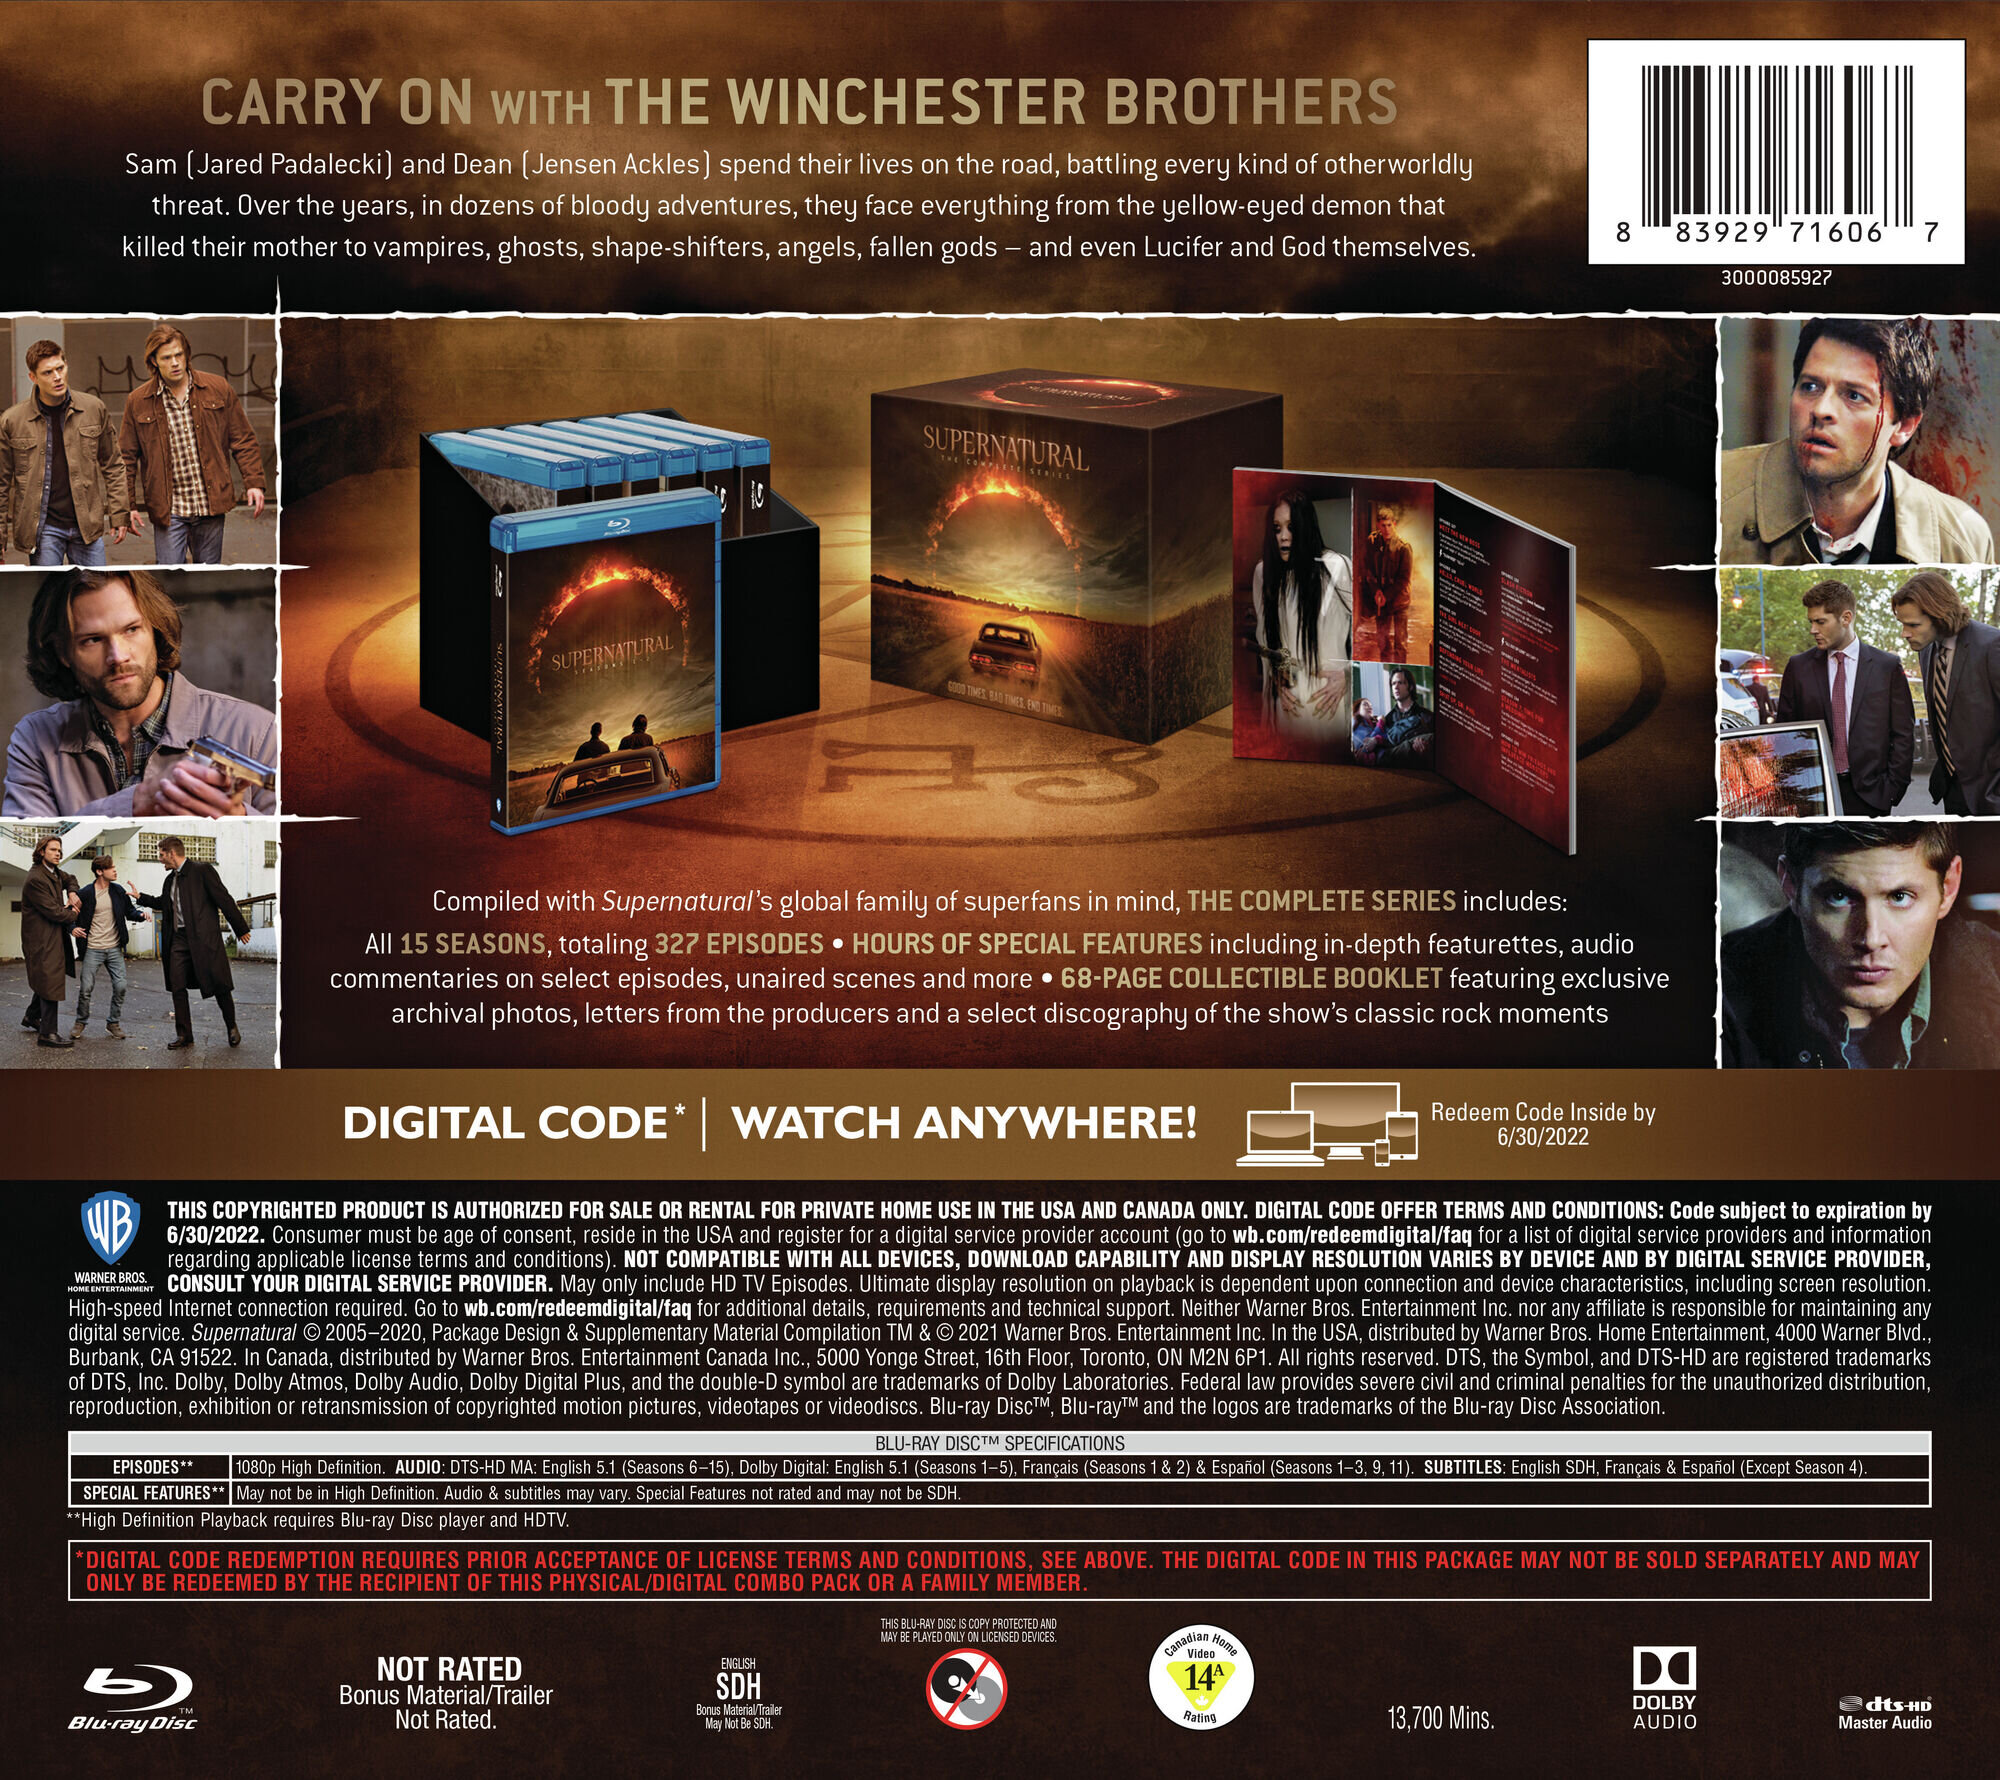 Supernatural…one of the last great TV box sets? — The Extras